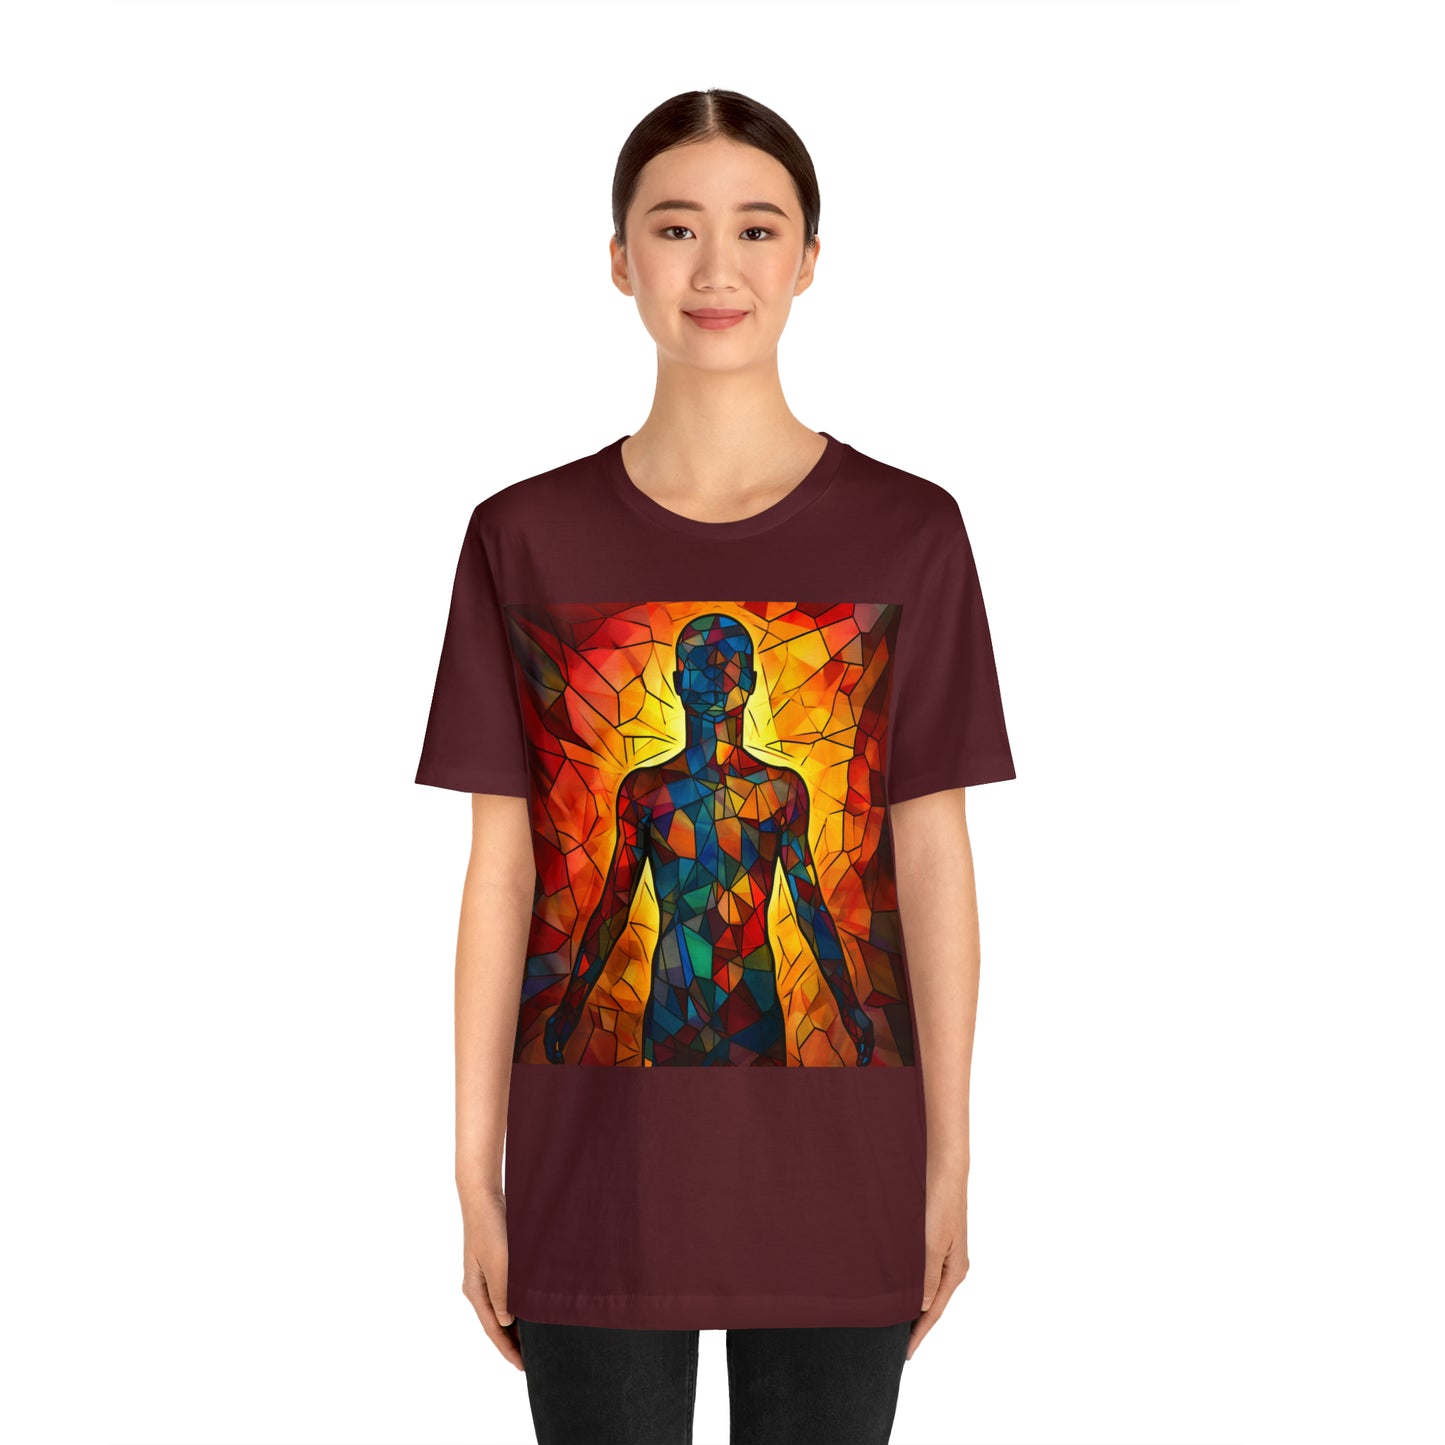 Stained Glass Person Tee